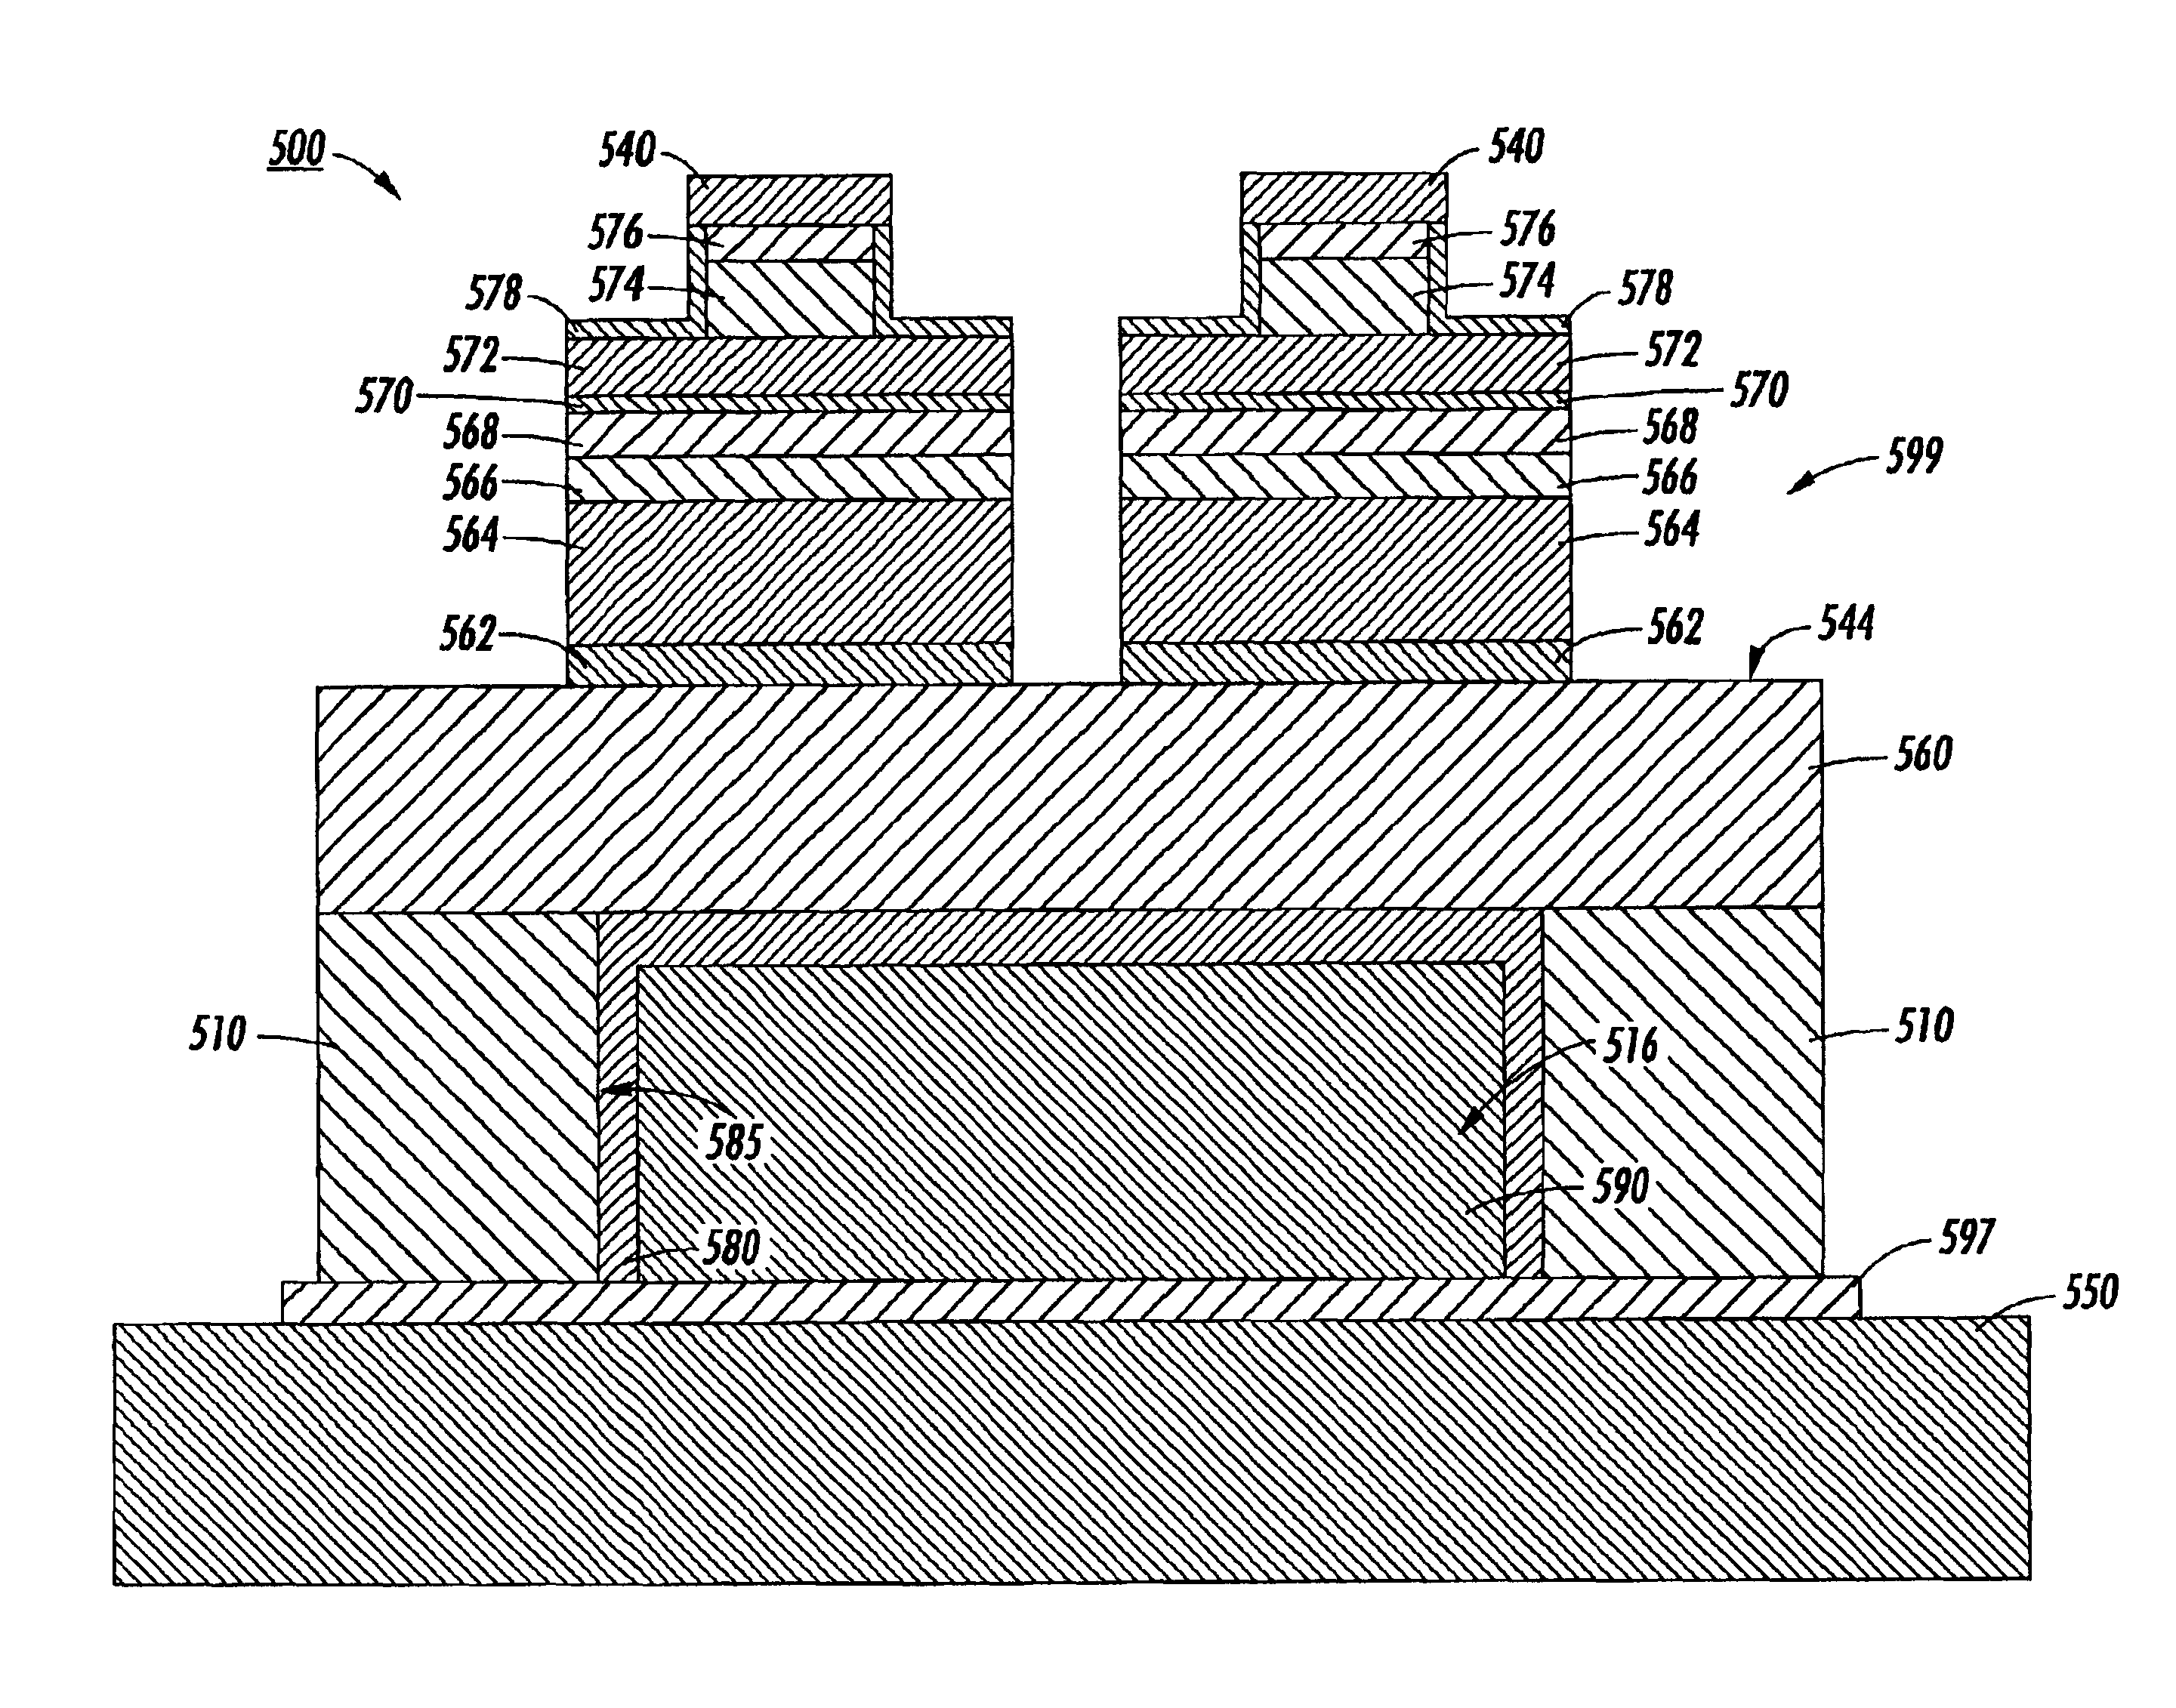 Substrates having increased thermal conductivity for semiconductor structures